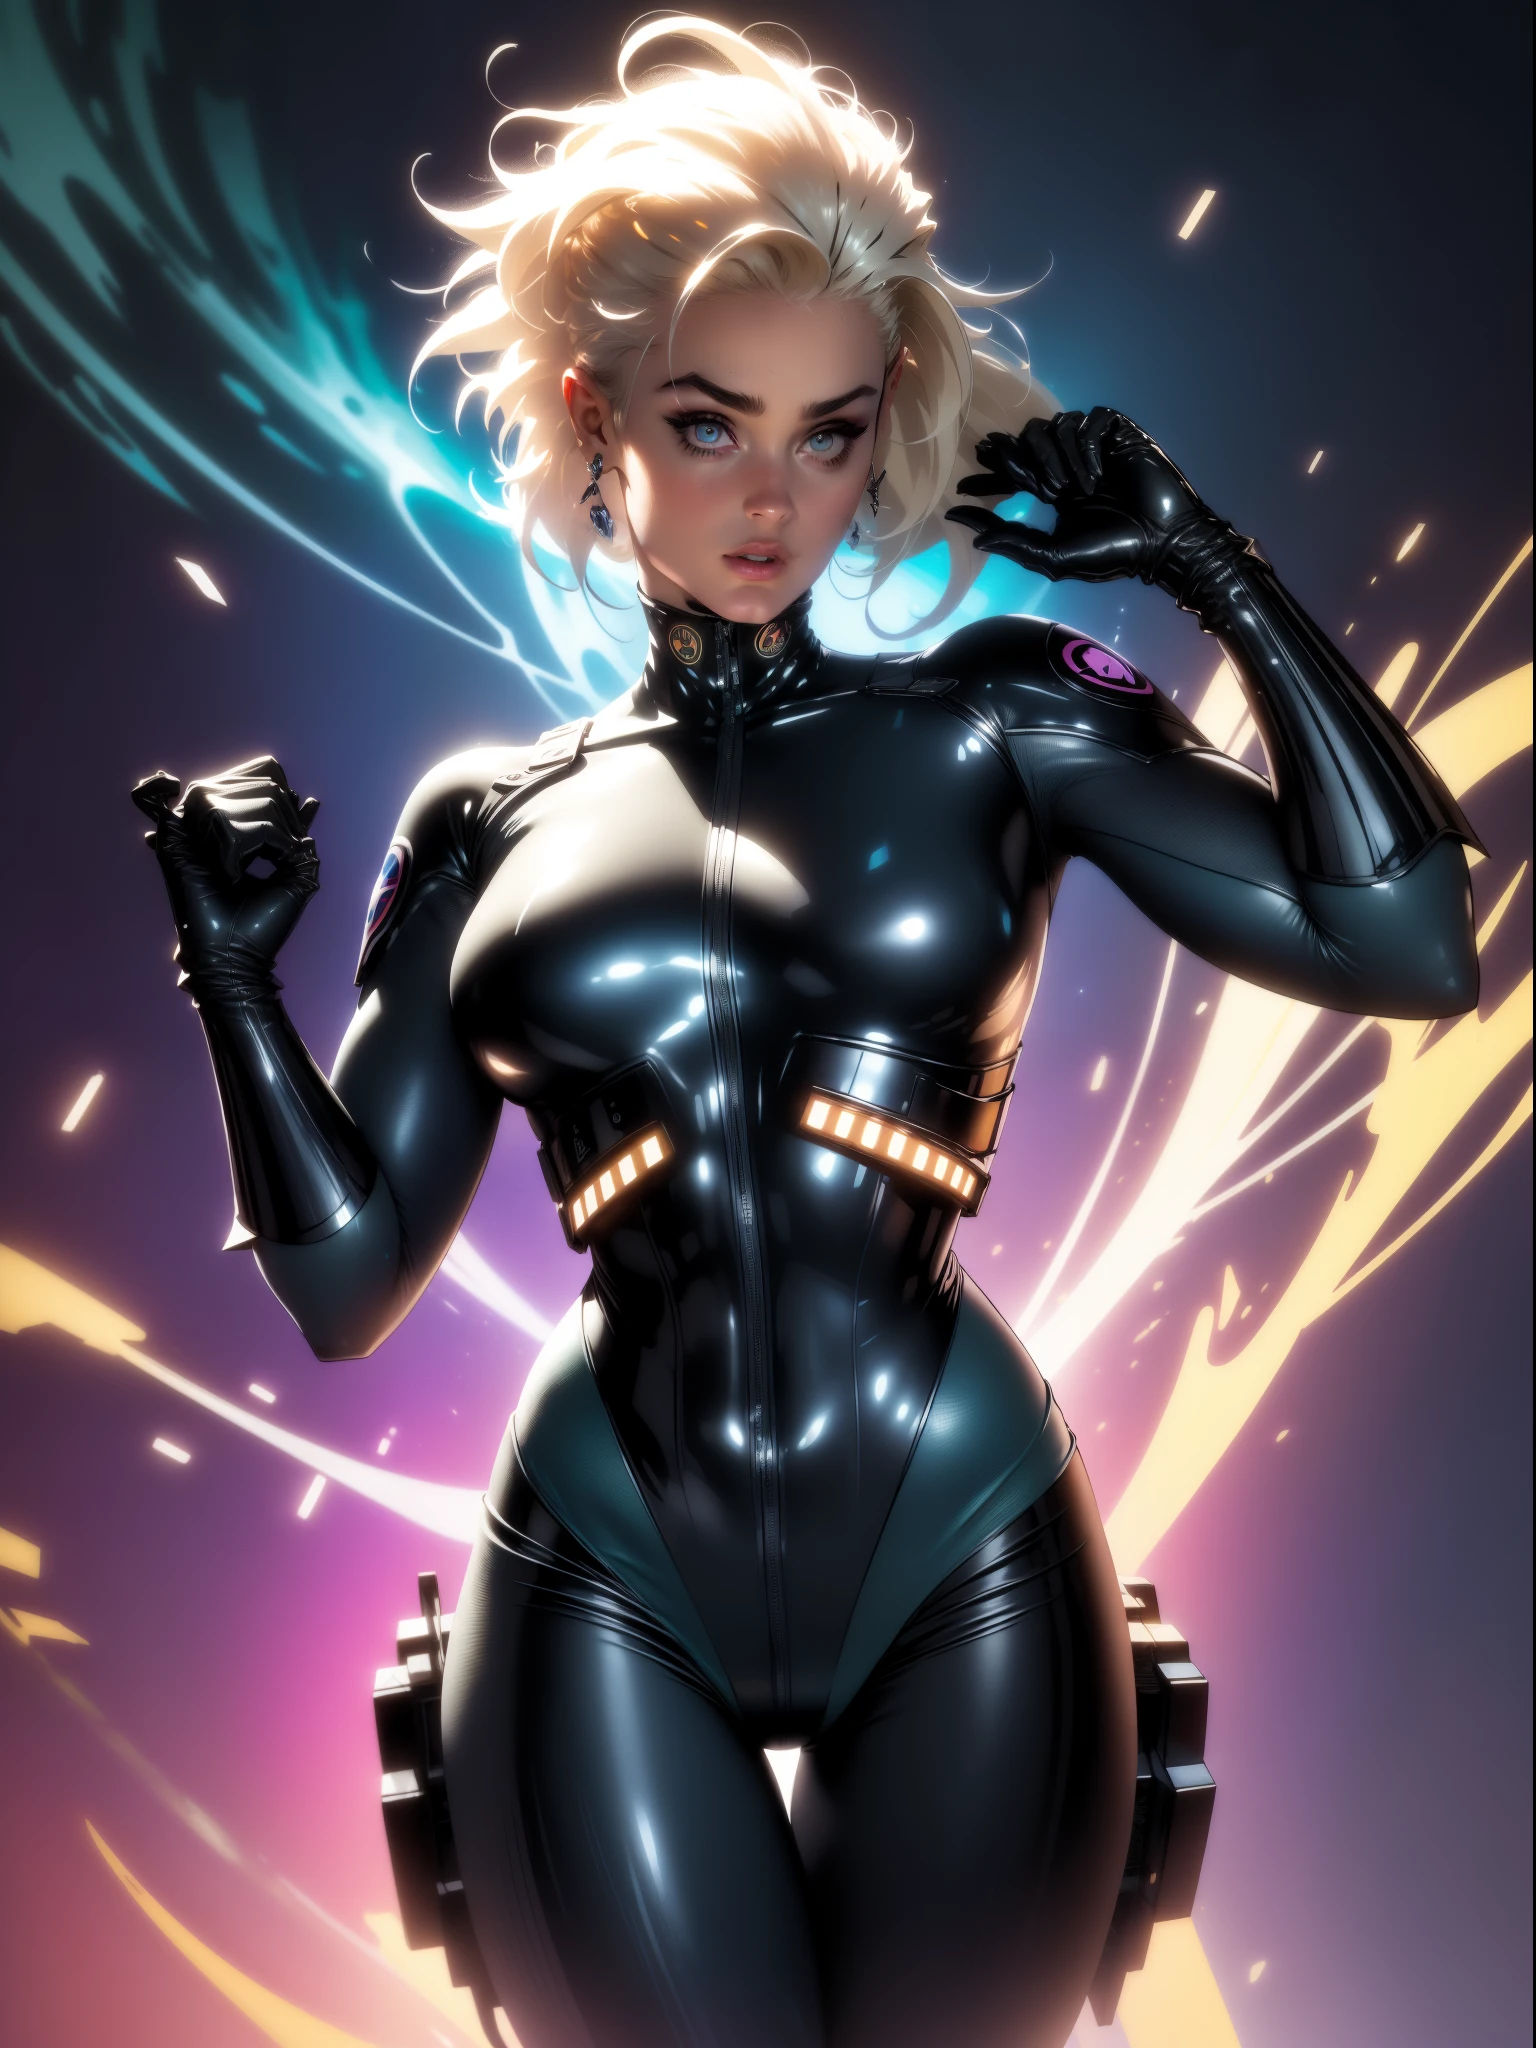 ((best qualityer)), ((work of art)), (detailded: 1.4), (absurdrez), Stefania Ferrario as fighter pilot ready for war, Clothes with spectacular abstract designs, color explosion, cosmic tattoo, nebula, defined muscular sculptural body, all-body, half thick bare thighs, cloused mouth, body covered by technological clothing, Neon Genesis Evangelion style, cyber punk, generous neckline, ((perfect medium breasts)), (super clear blue eyes), ((white and orange clothes)), (((short blonde hair)))), long black eyelashes heavy makeup, garter belt made from barbed wire, for much, private--V5, close to real, psychopath, crazy face, pose sexy, fractal background, 2 piece outfit, cake, centred, scale to fit dimensions, HDR (High-range dynamics),ray tracing,nvidia RTX,Super-resolution,Irreal 5, underground dispersal, PBR Texture, Post-processing, Anisotropic filtering, Depth of field, maximum clarity and sharpness, Multilayer textures, Albedo and Mirror Maps, surface shading, Accurate simulation of light-material interaction, perfect proportions, octane rendering, two tone lighting, large aperture, Low ISO, white balance, rule of thirds, 8K CRU, crysisnanosuit 